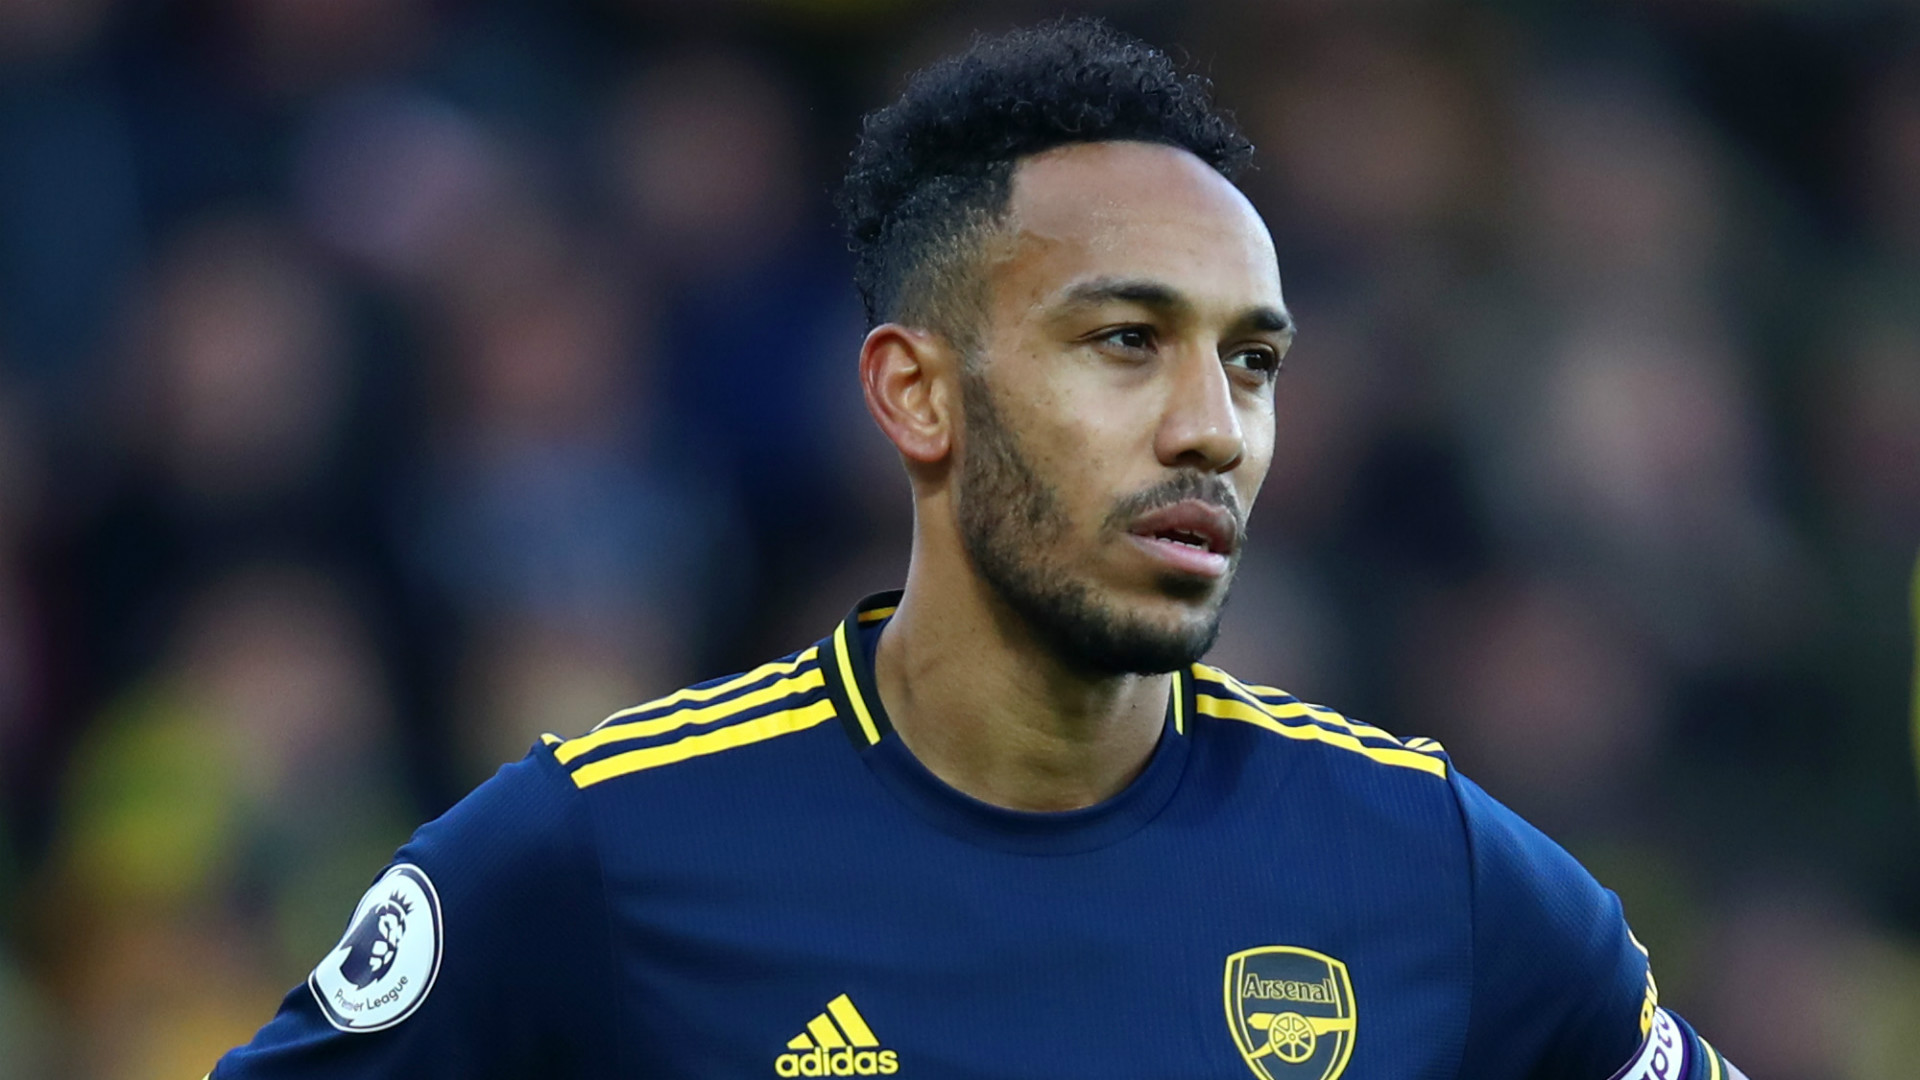 ‘You can’t blame Aubameyang for contract concerns’ – Arsenal need Ancelotti to convince key men to stay, says Campbell